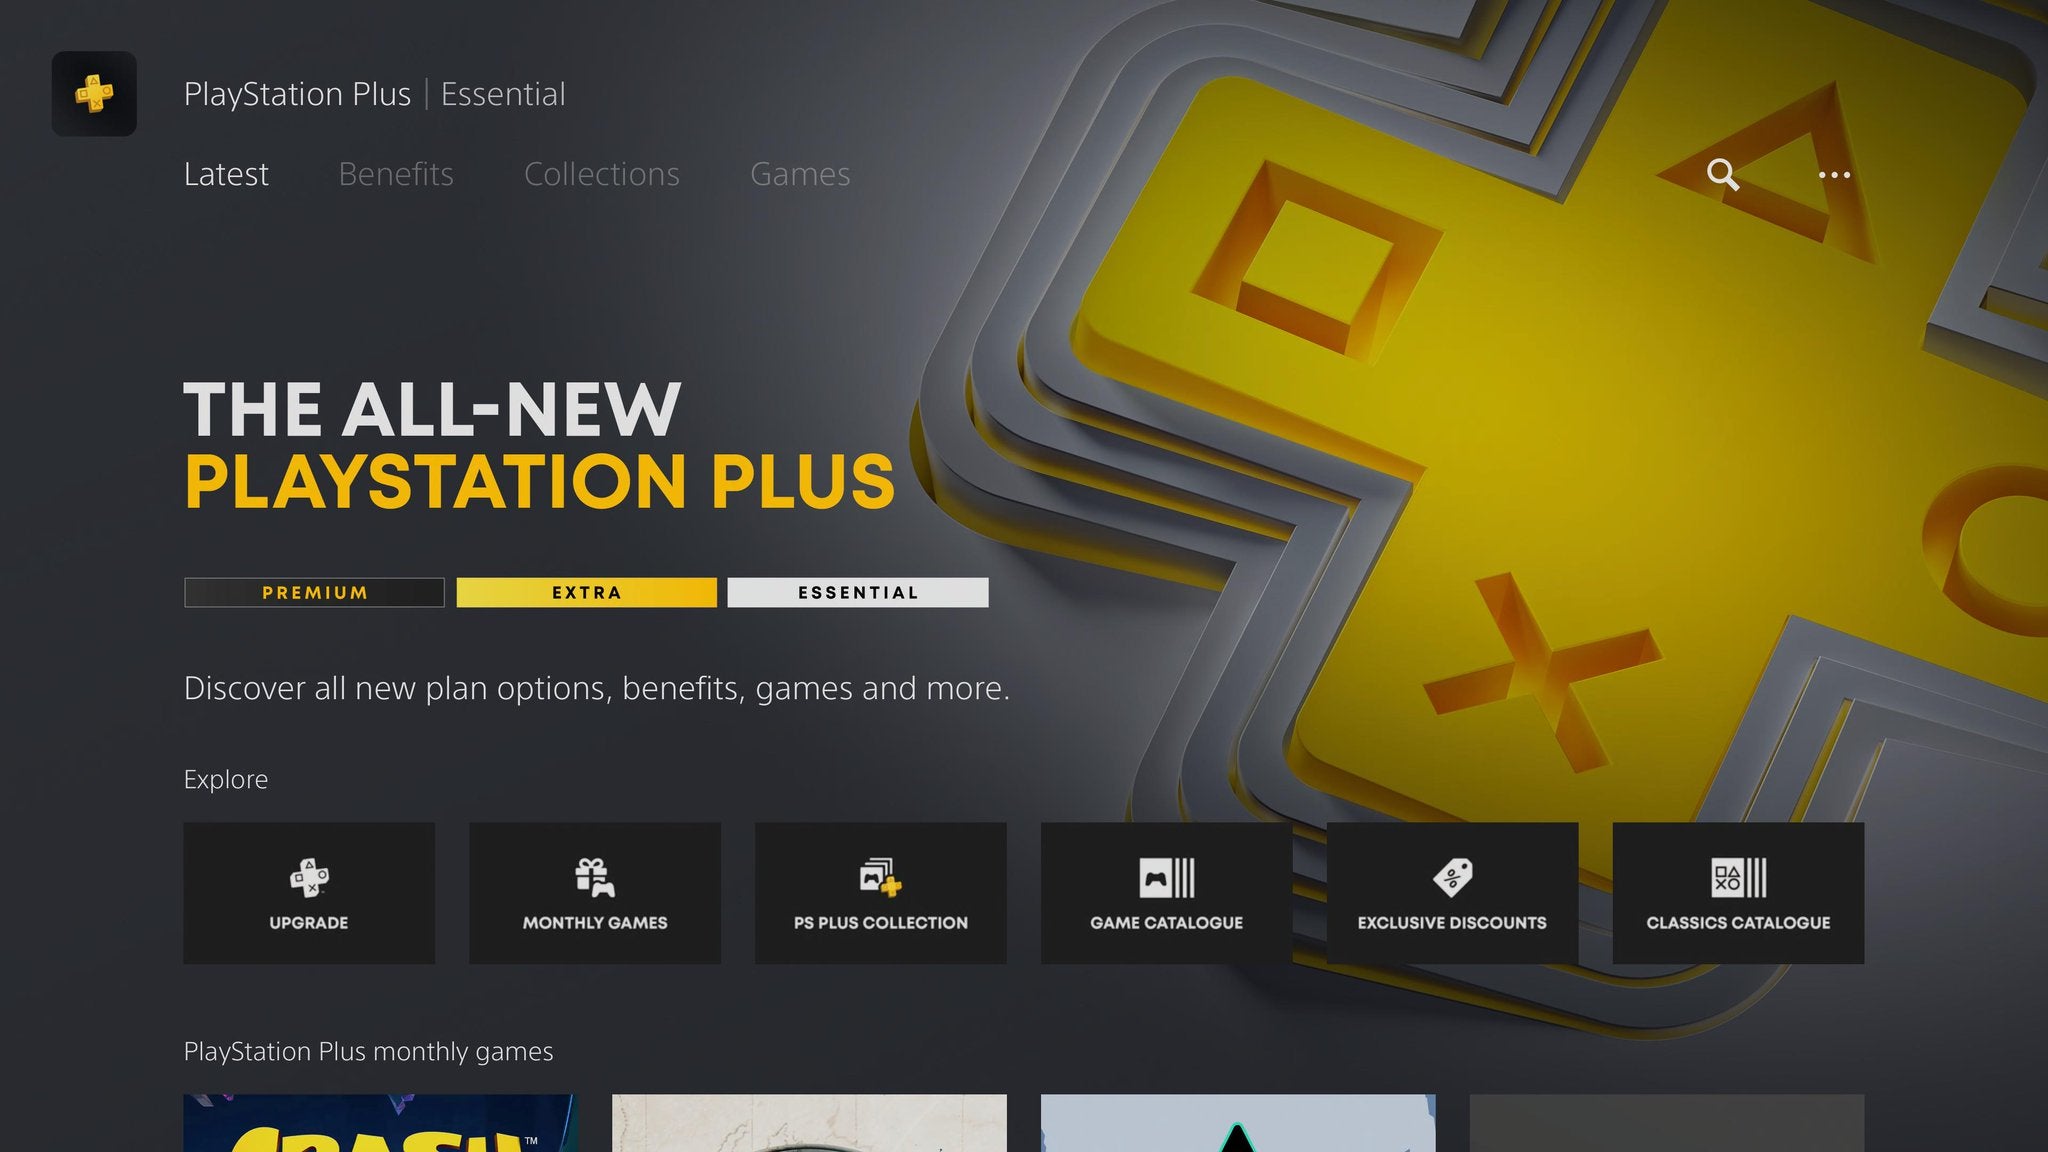 The PlayStation Plus promotion on PS5